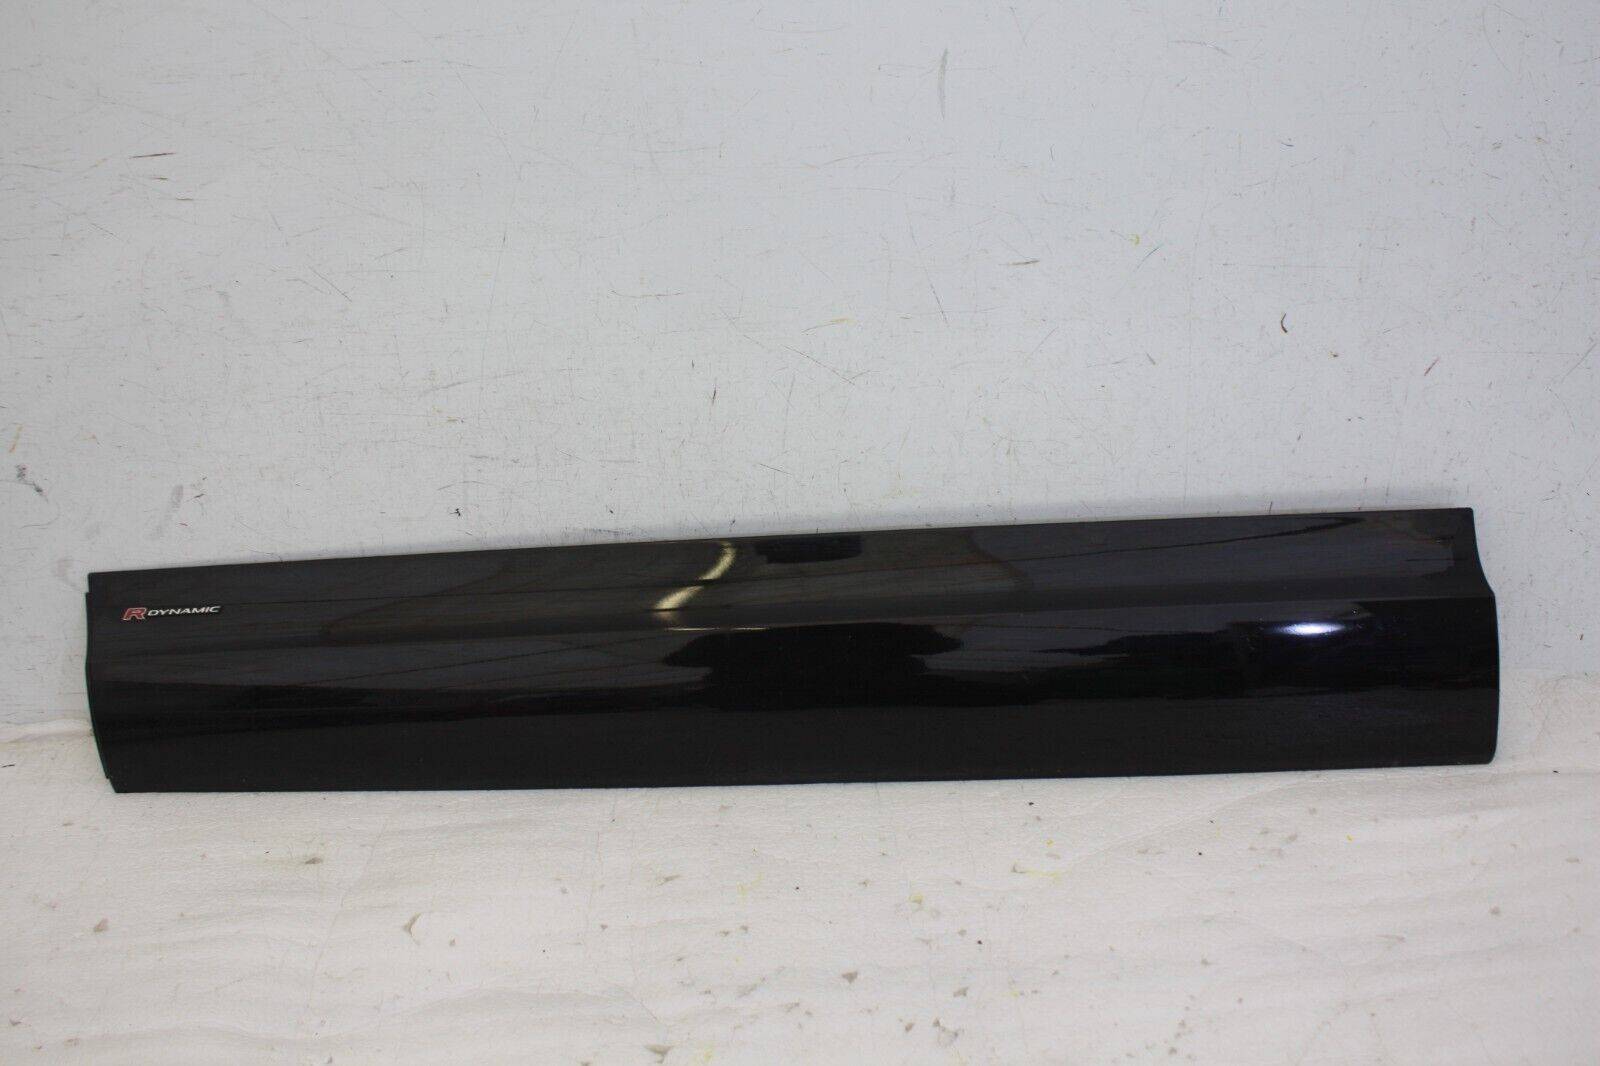 Range Rover Discovery Front Left Door Moulding 2017 ON HY3M 21065 AC Genuine 176427982132